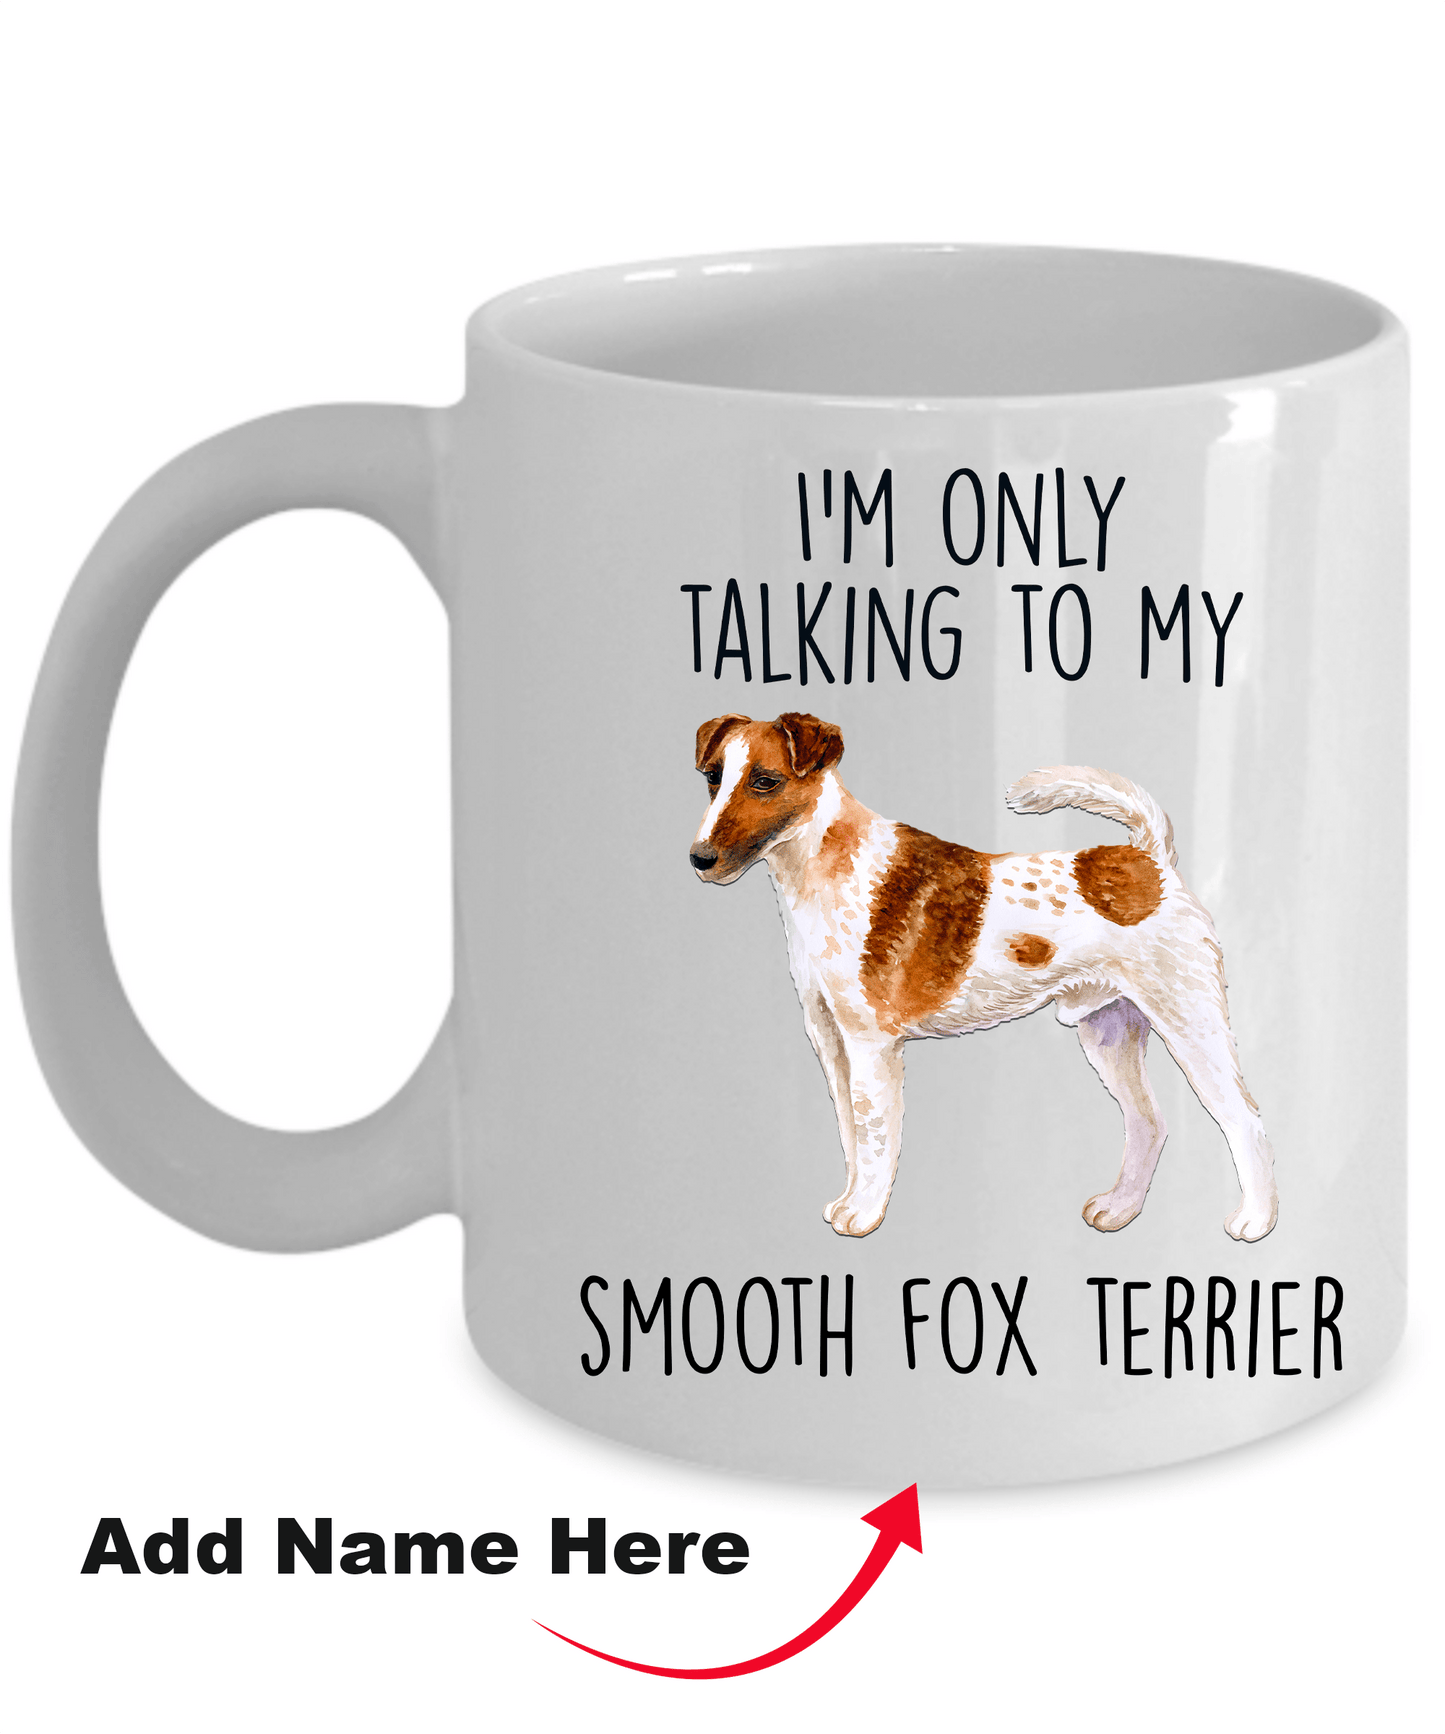 Smooth Fox Terrier Funny Ceramic Coffee Mug - I'm Only Talking to my Dog